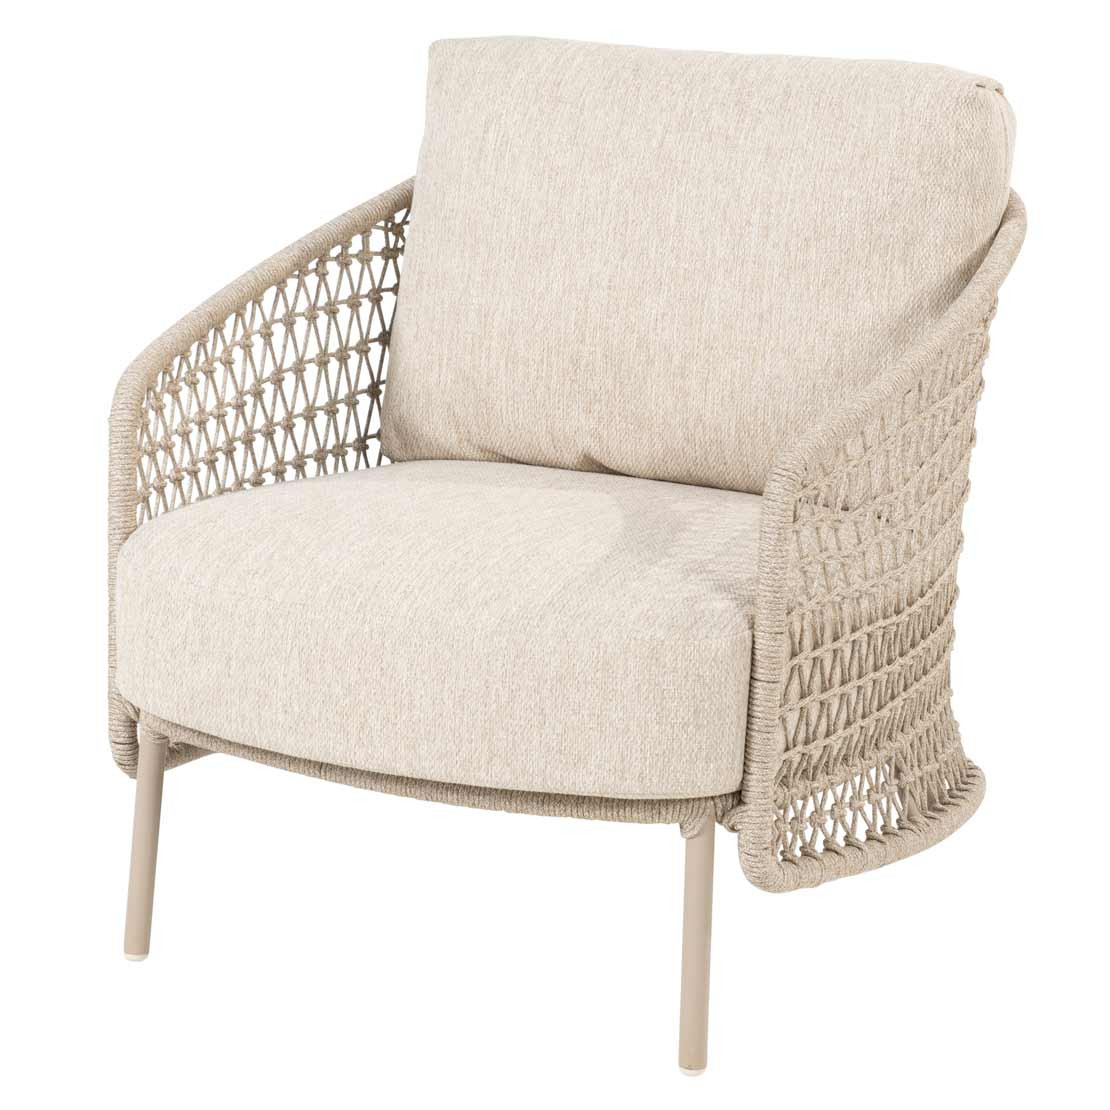 Puccini living chair latte with 2 cushions